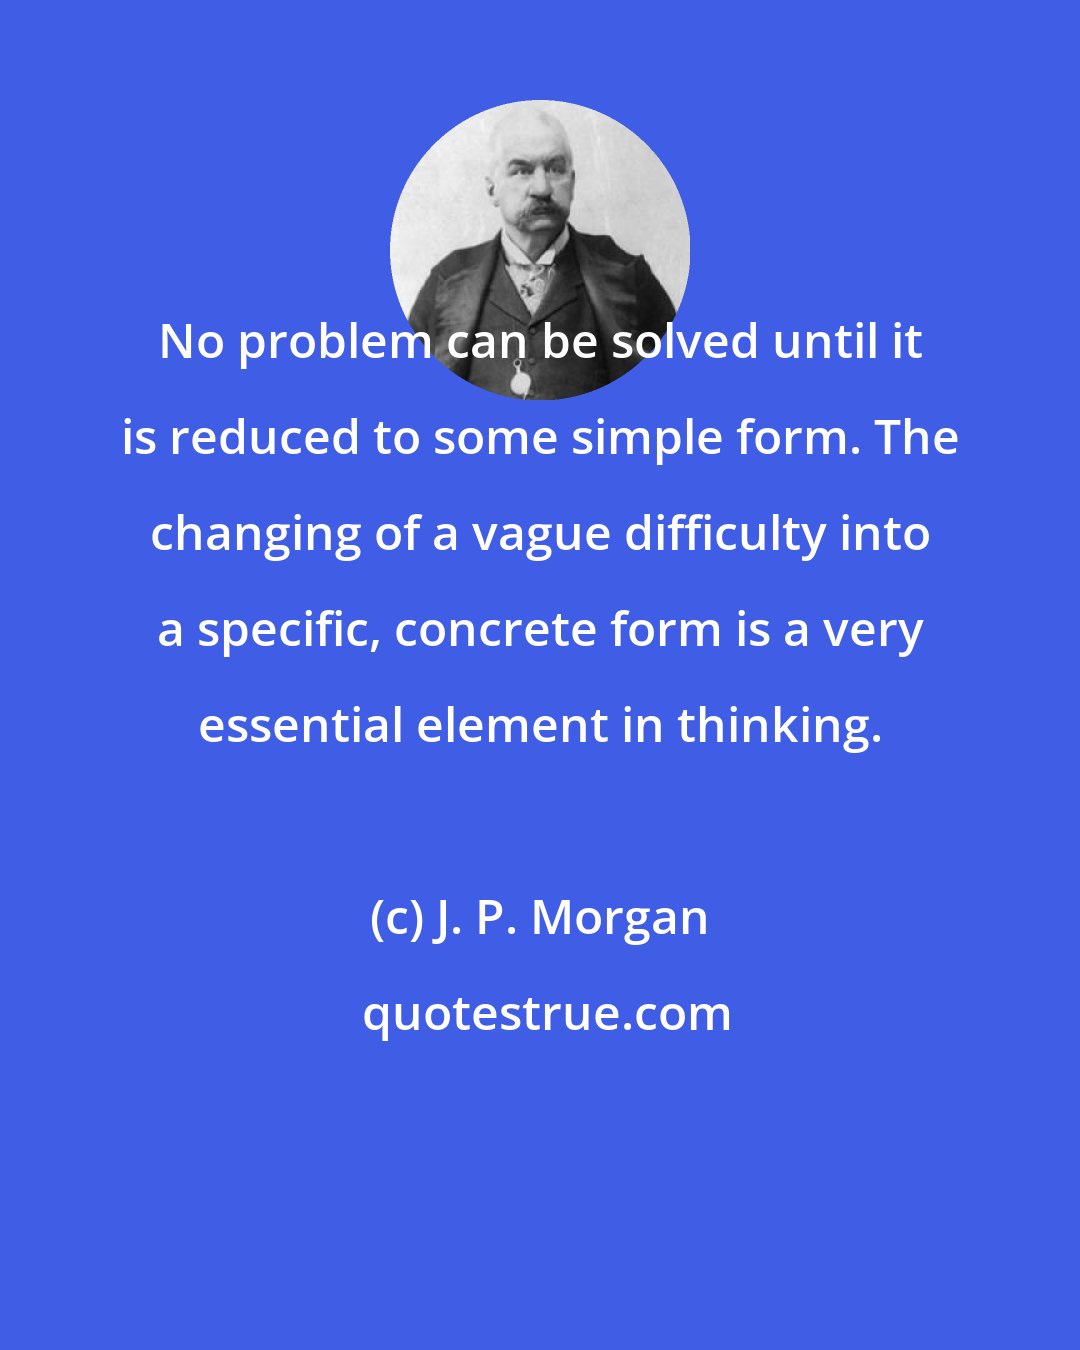 J. P. Morgan: No problem can be solved until it is reduced to some simple form. The changing of a vague difficulty into a specific, concrete form is a very essential element in thinking.